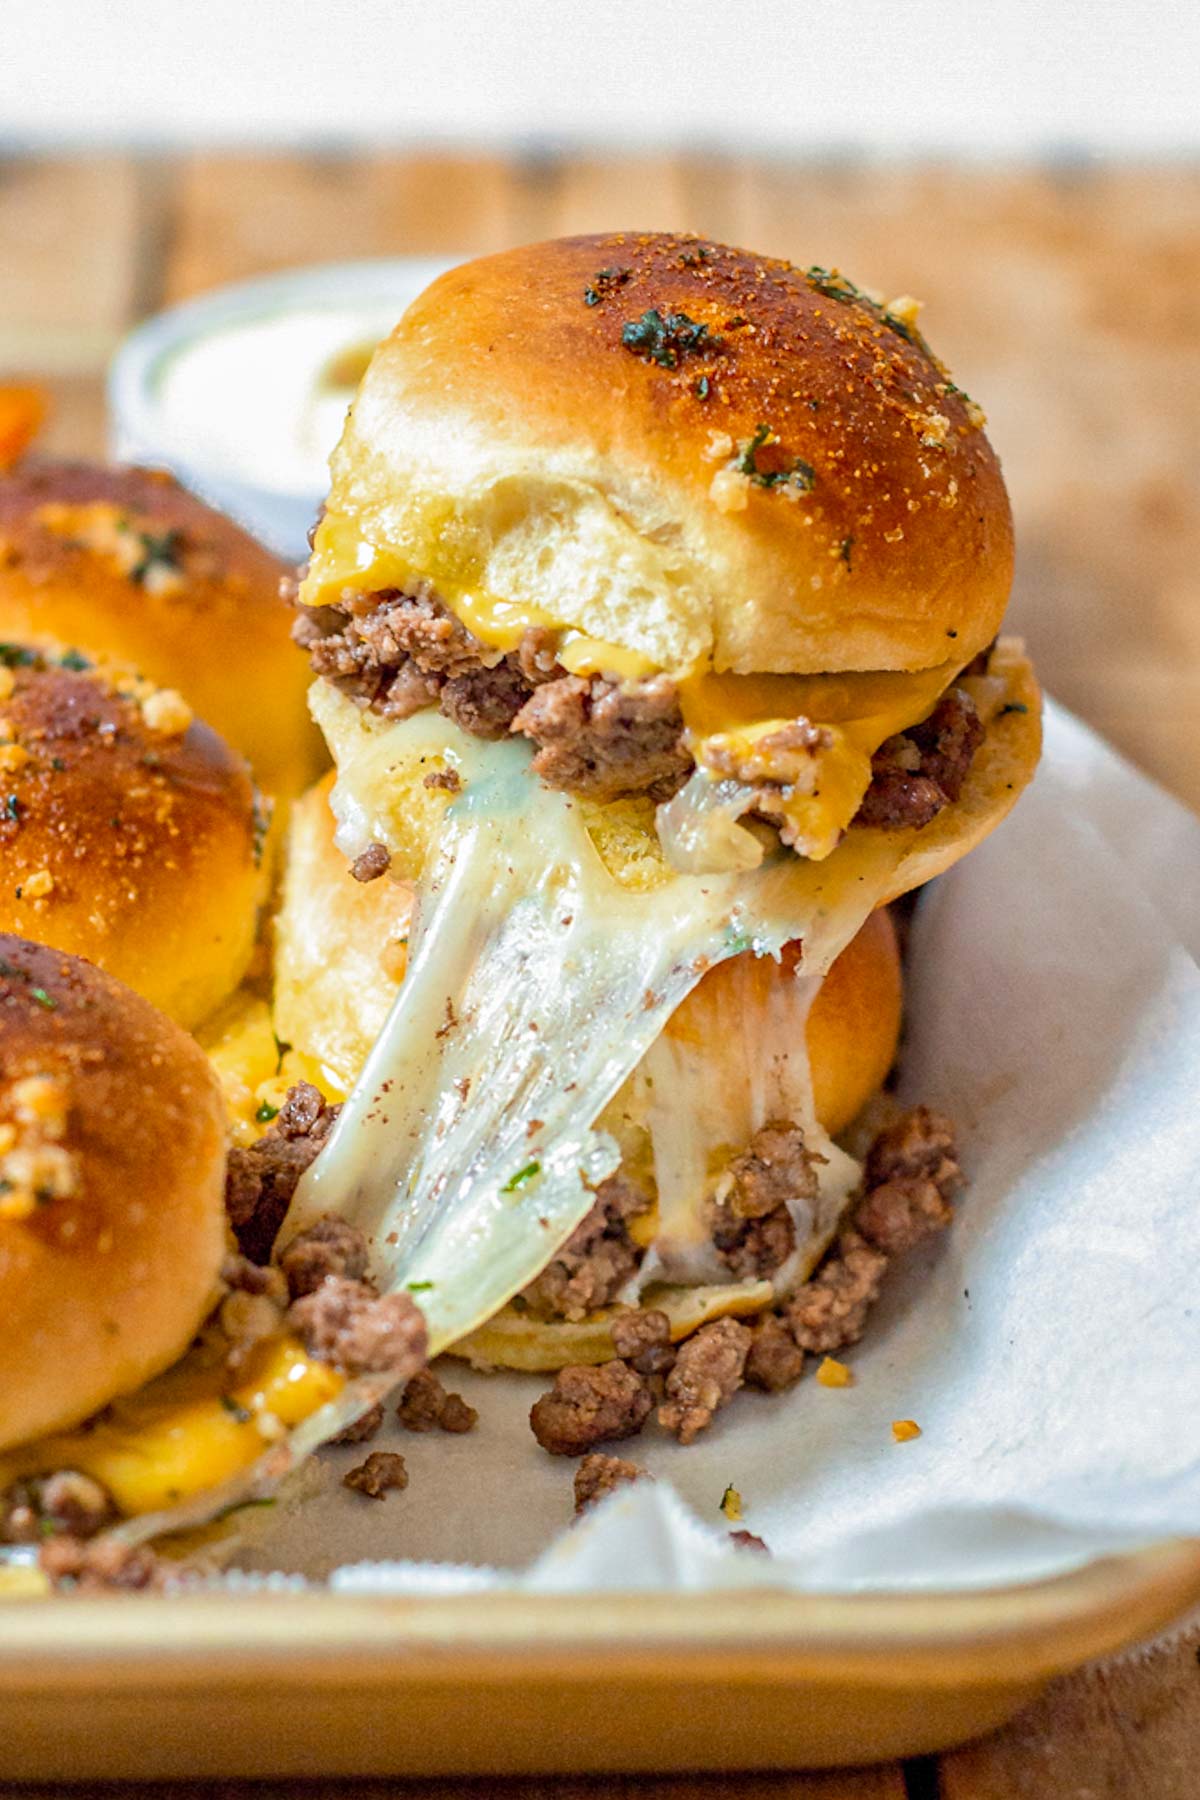 Cheese stretches as a Ground Beef Slider is pulled from a baking tray.